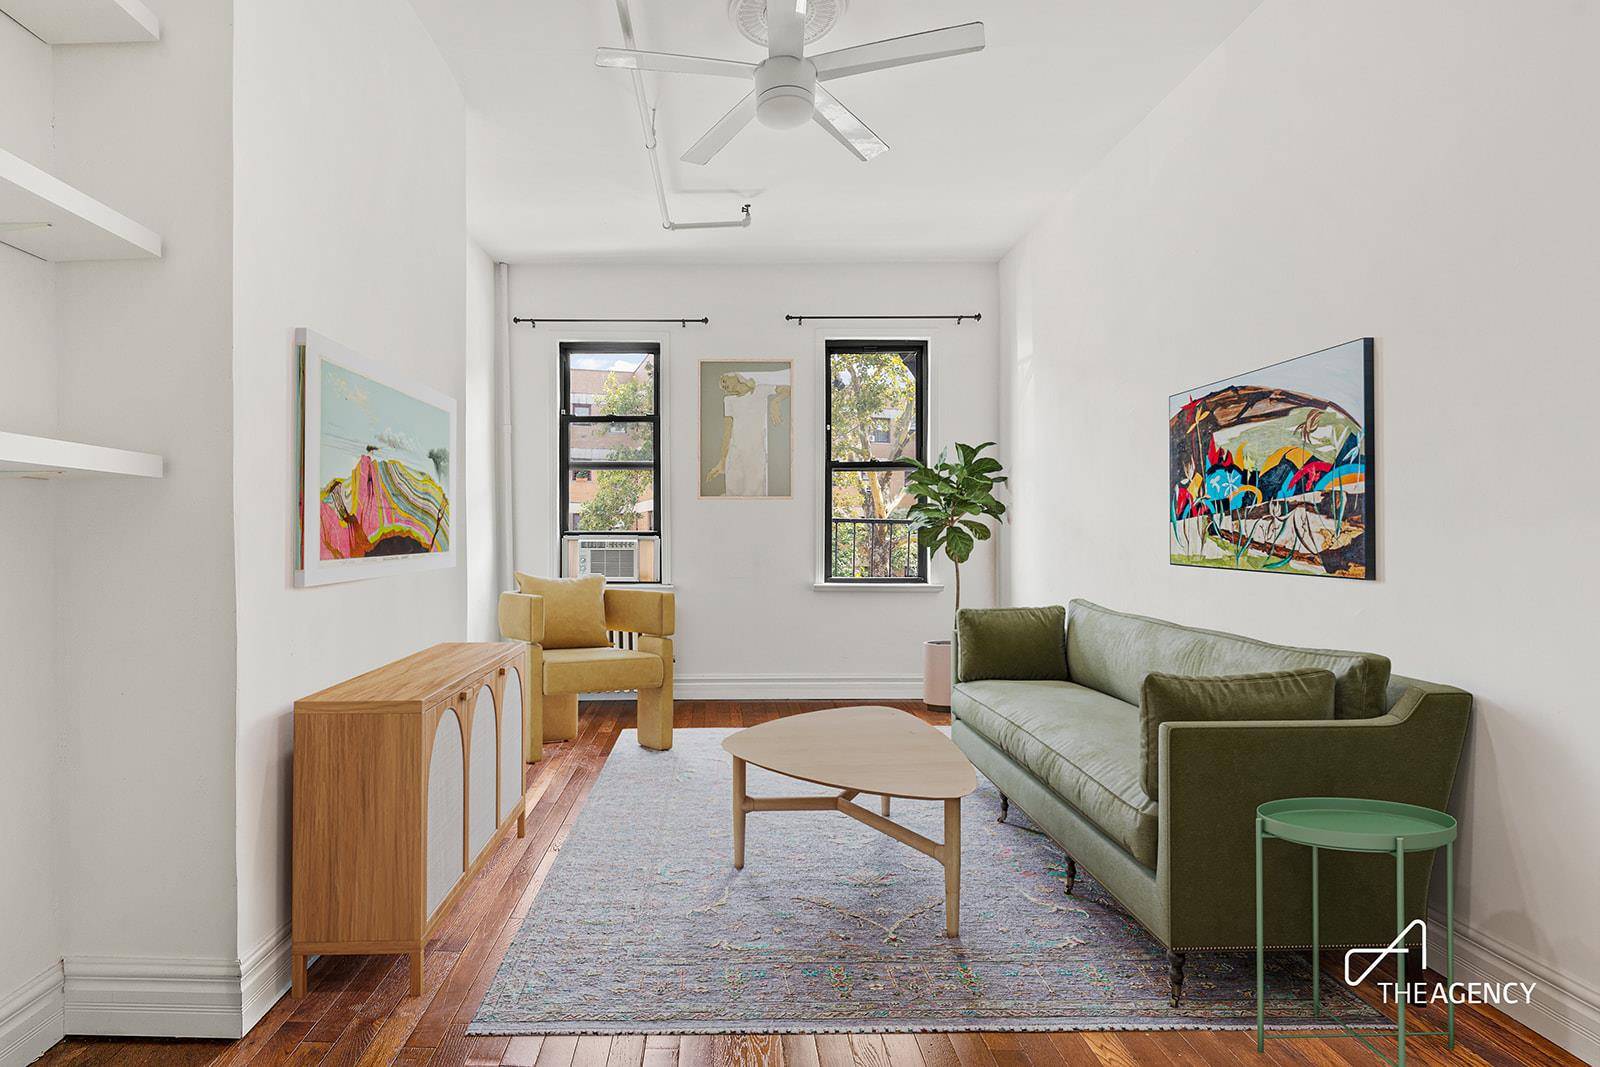 Utterly charming and warm, this 1 bedroom home with an office nook is the antidote to cookie cutter apartment dwelling.